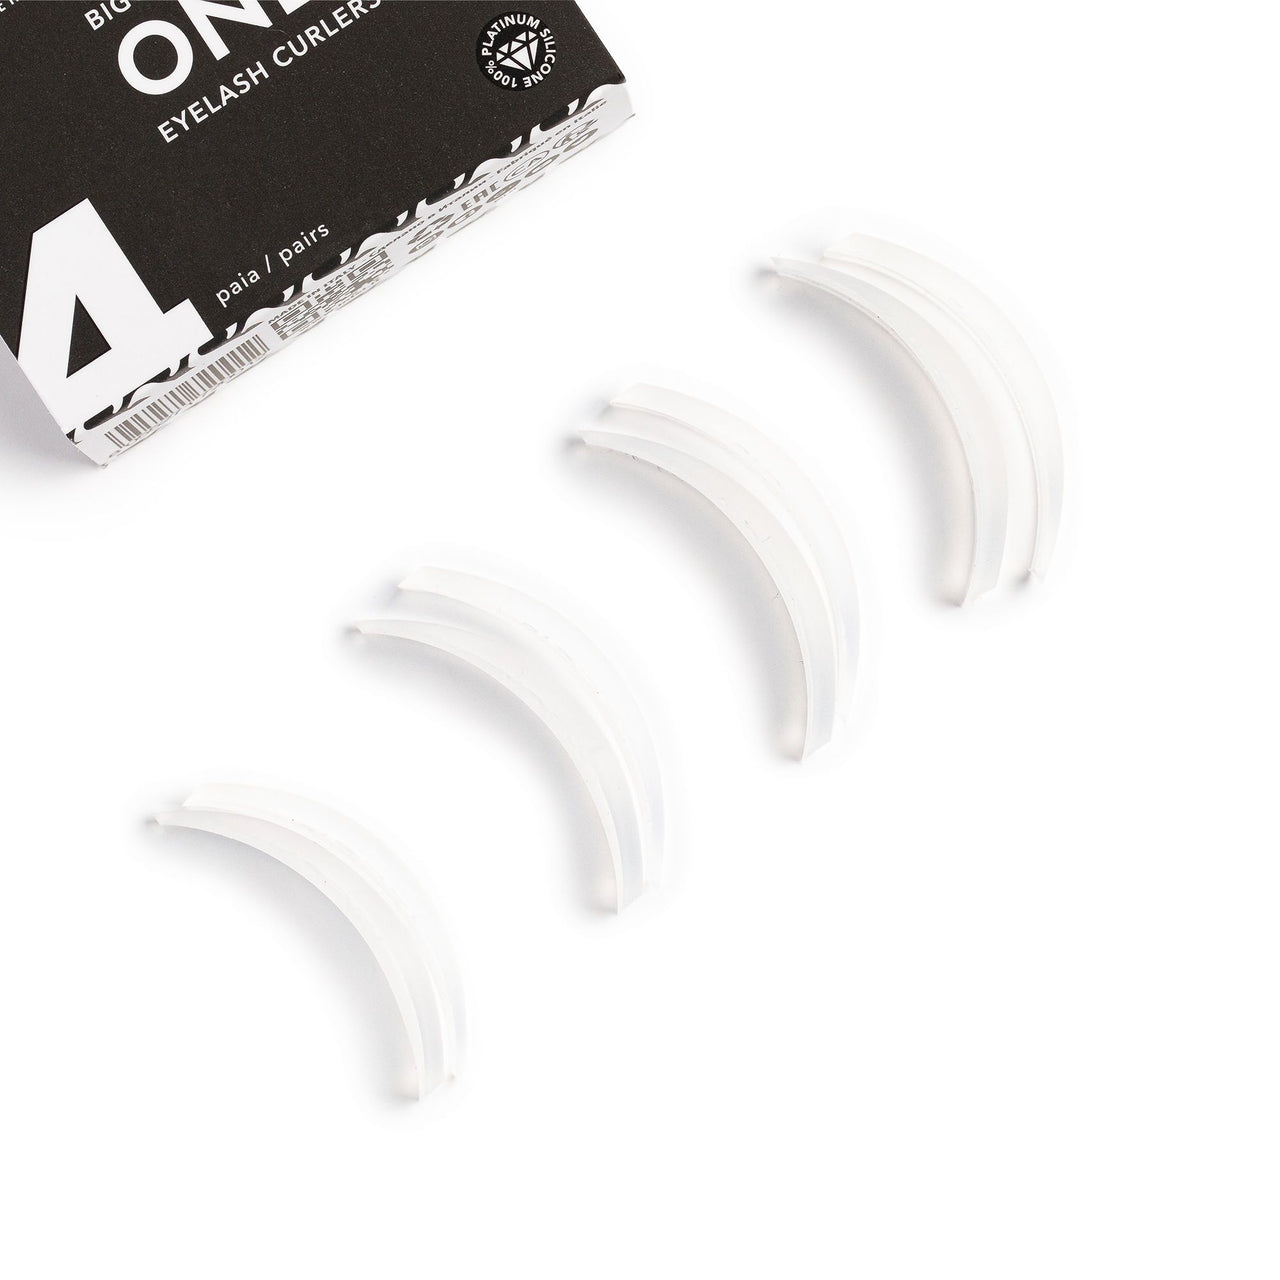 InLei® "ONLY" Silicone Shields Dolly Curl